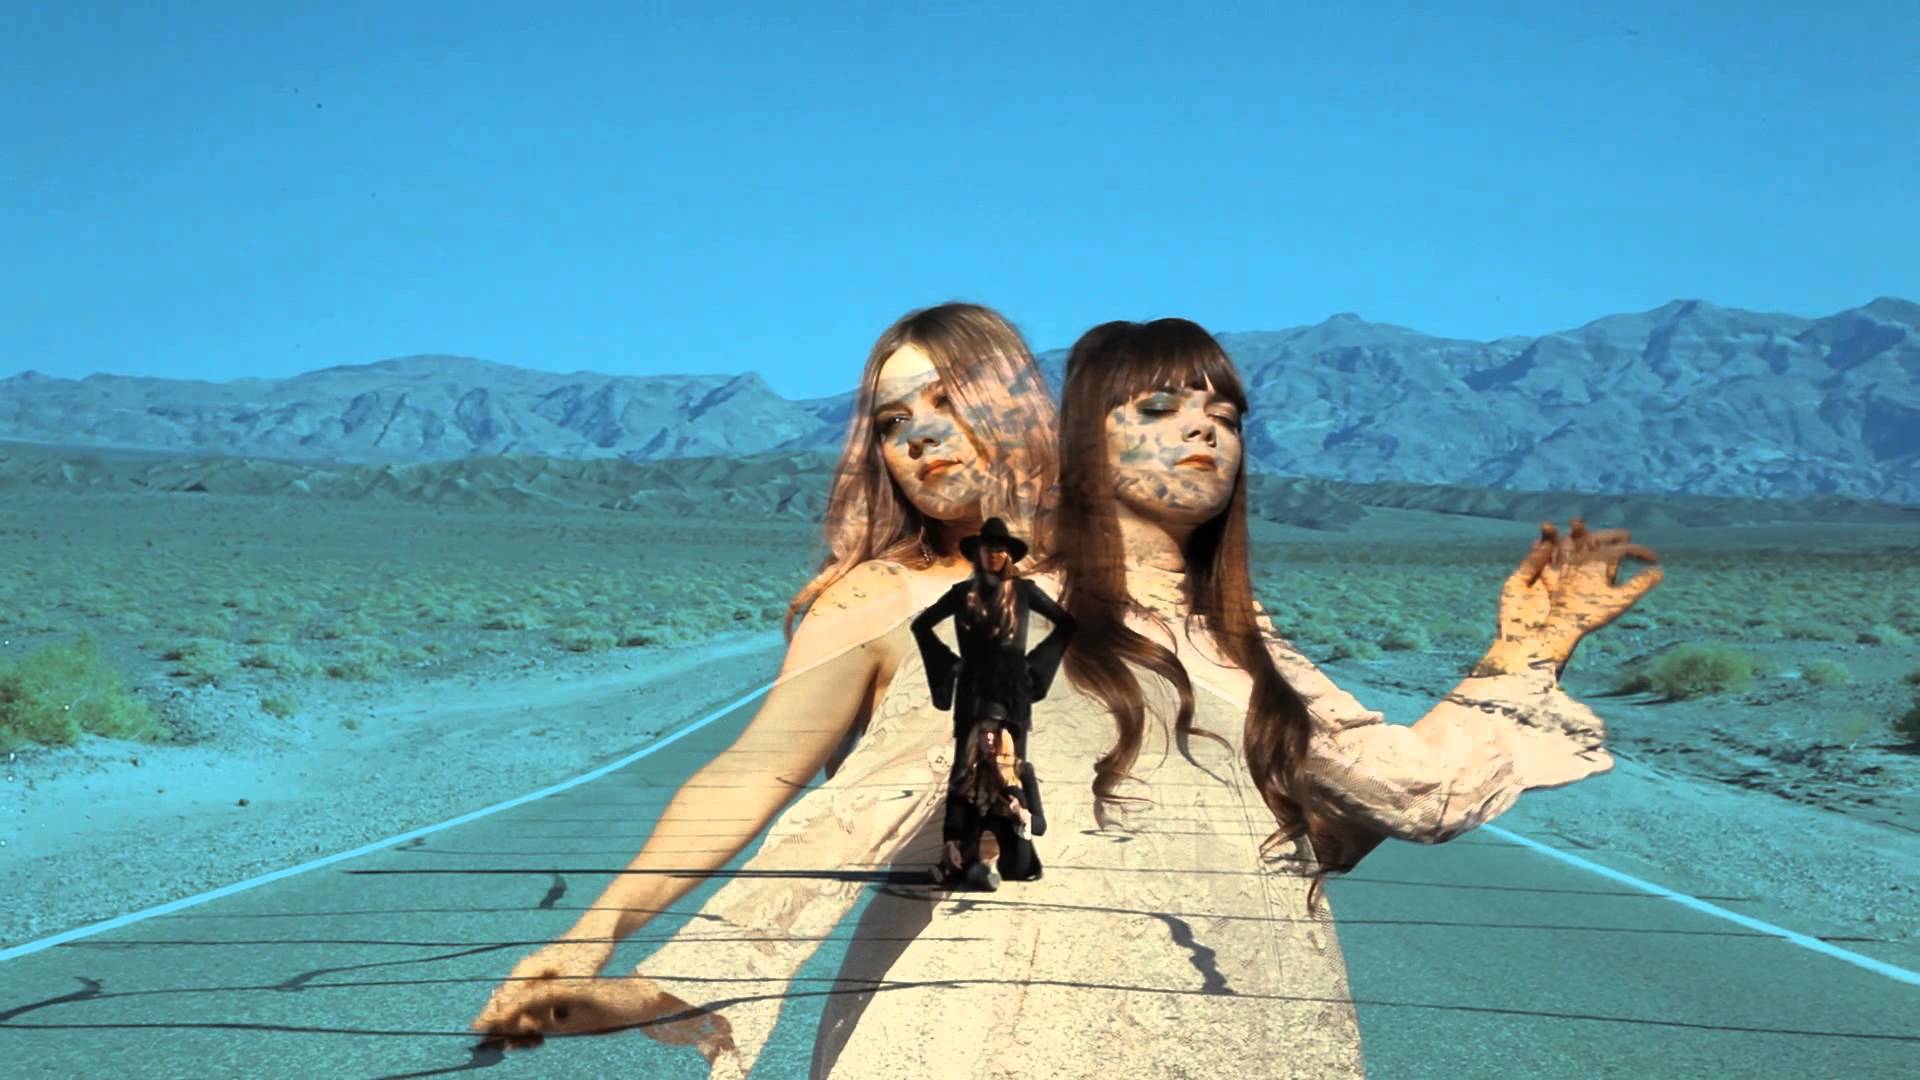 First Aid Kit - Silver Lining